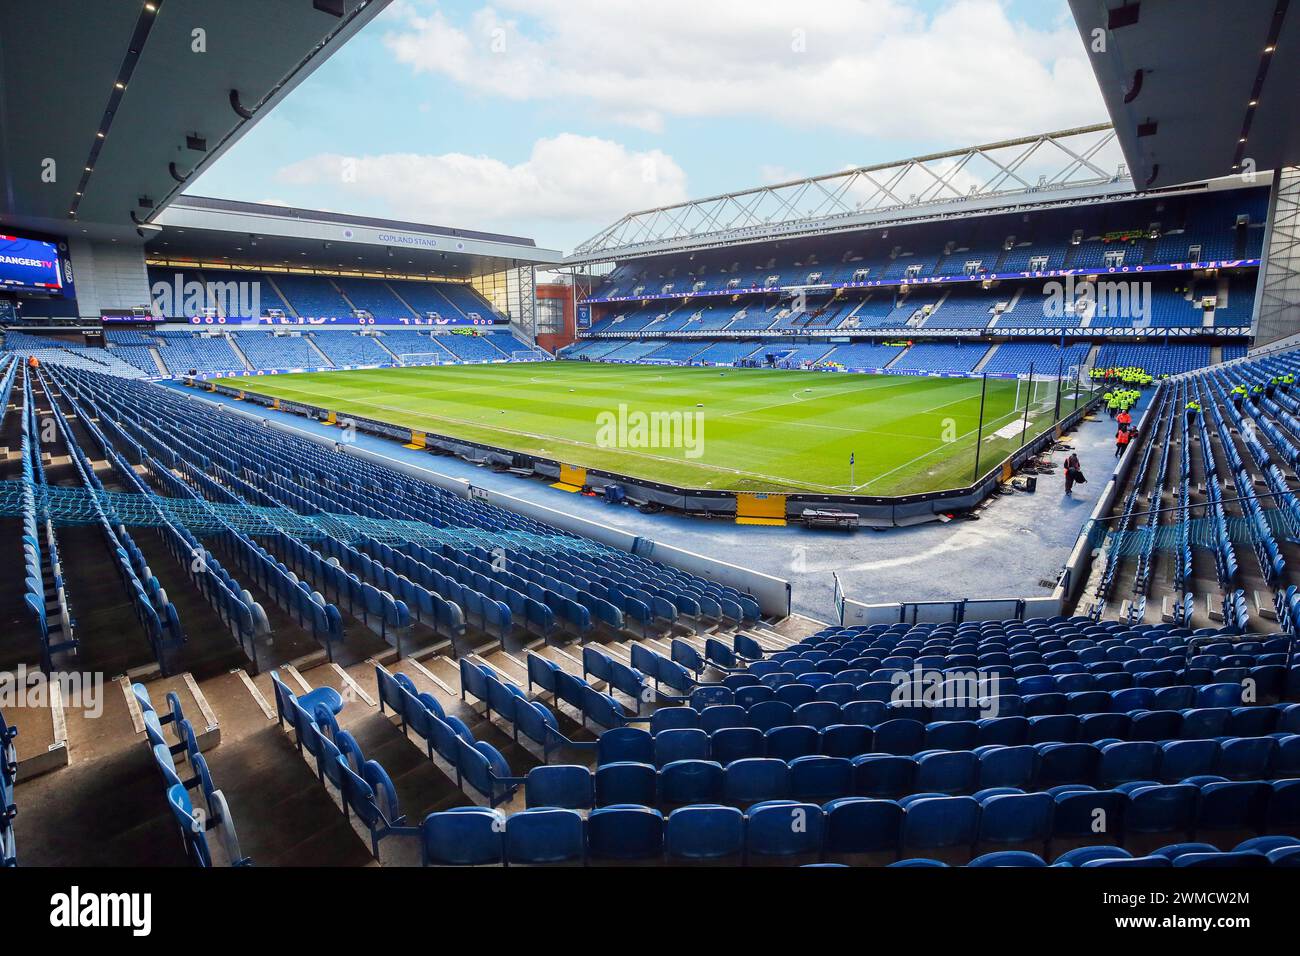 Playing pitch and spectator stands inside Ibrox Stadium, home ground of Rangers Football Club, Glasgow, Scotland, UK Stock Photo